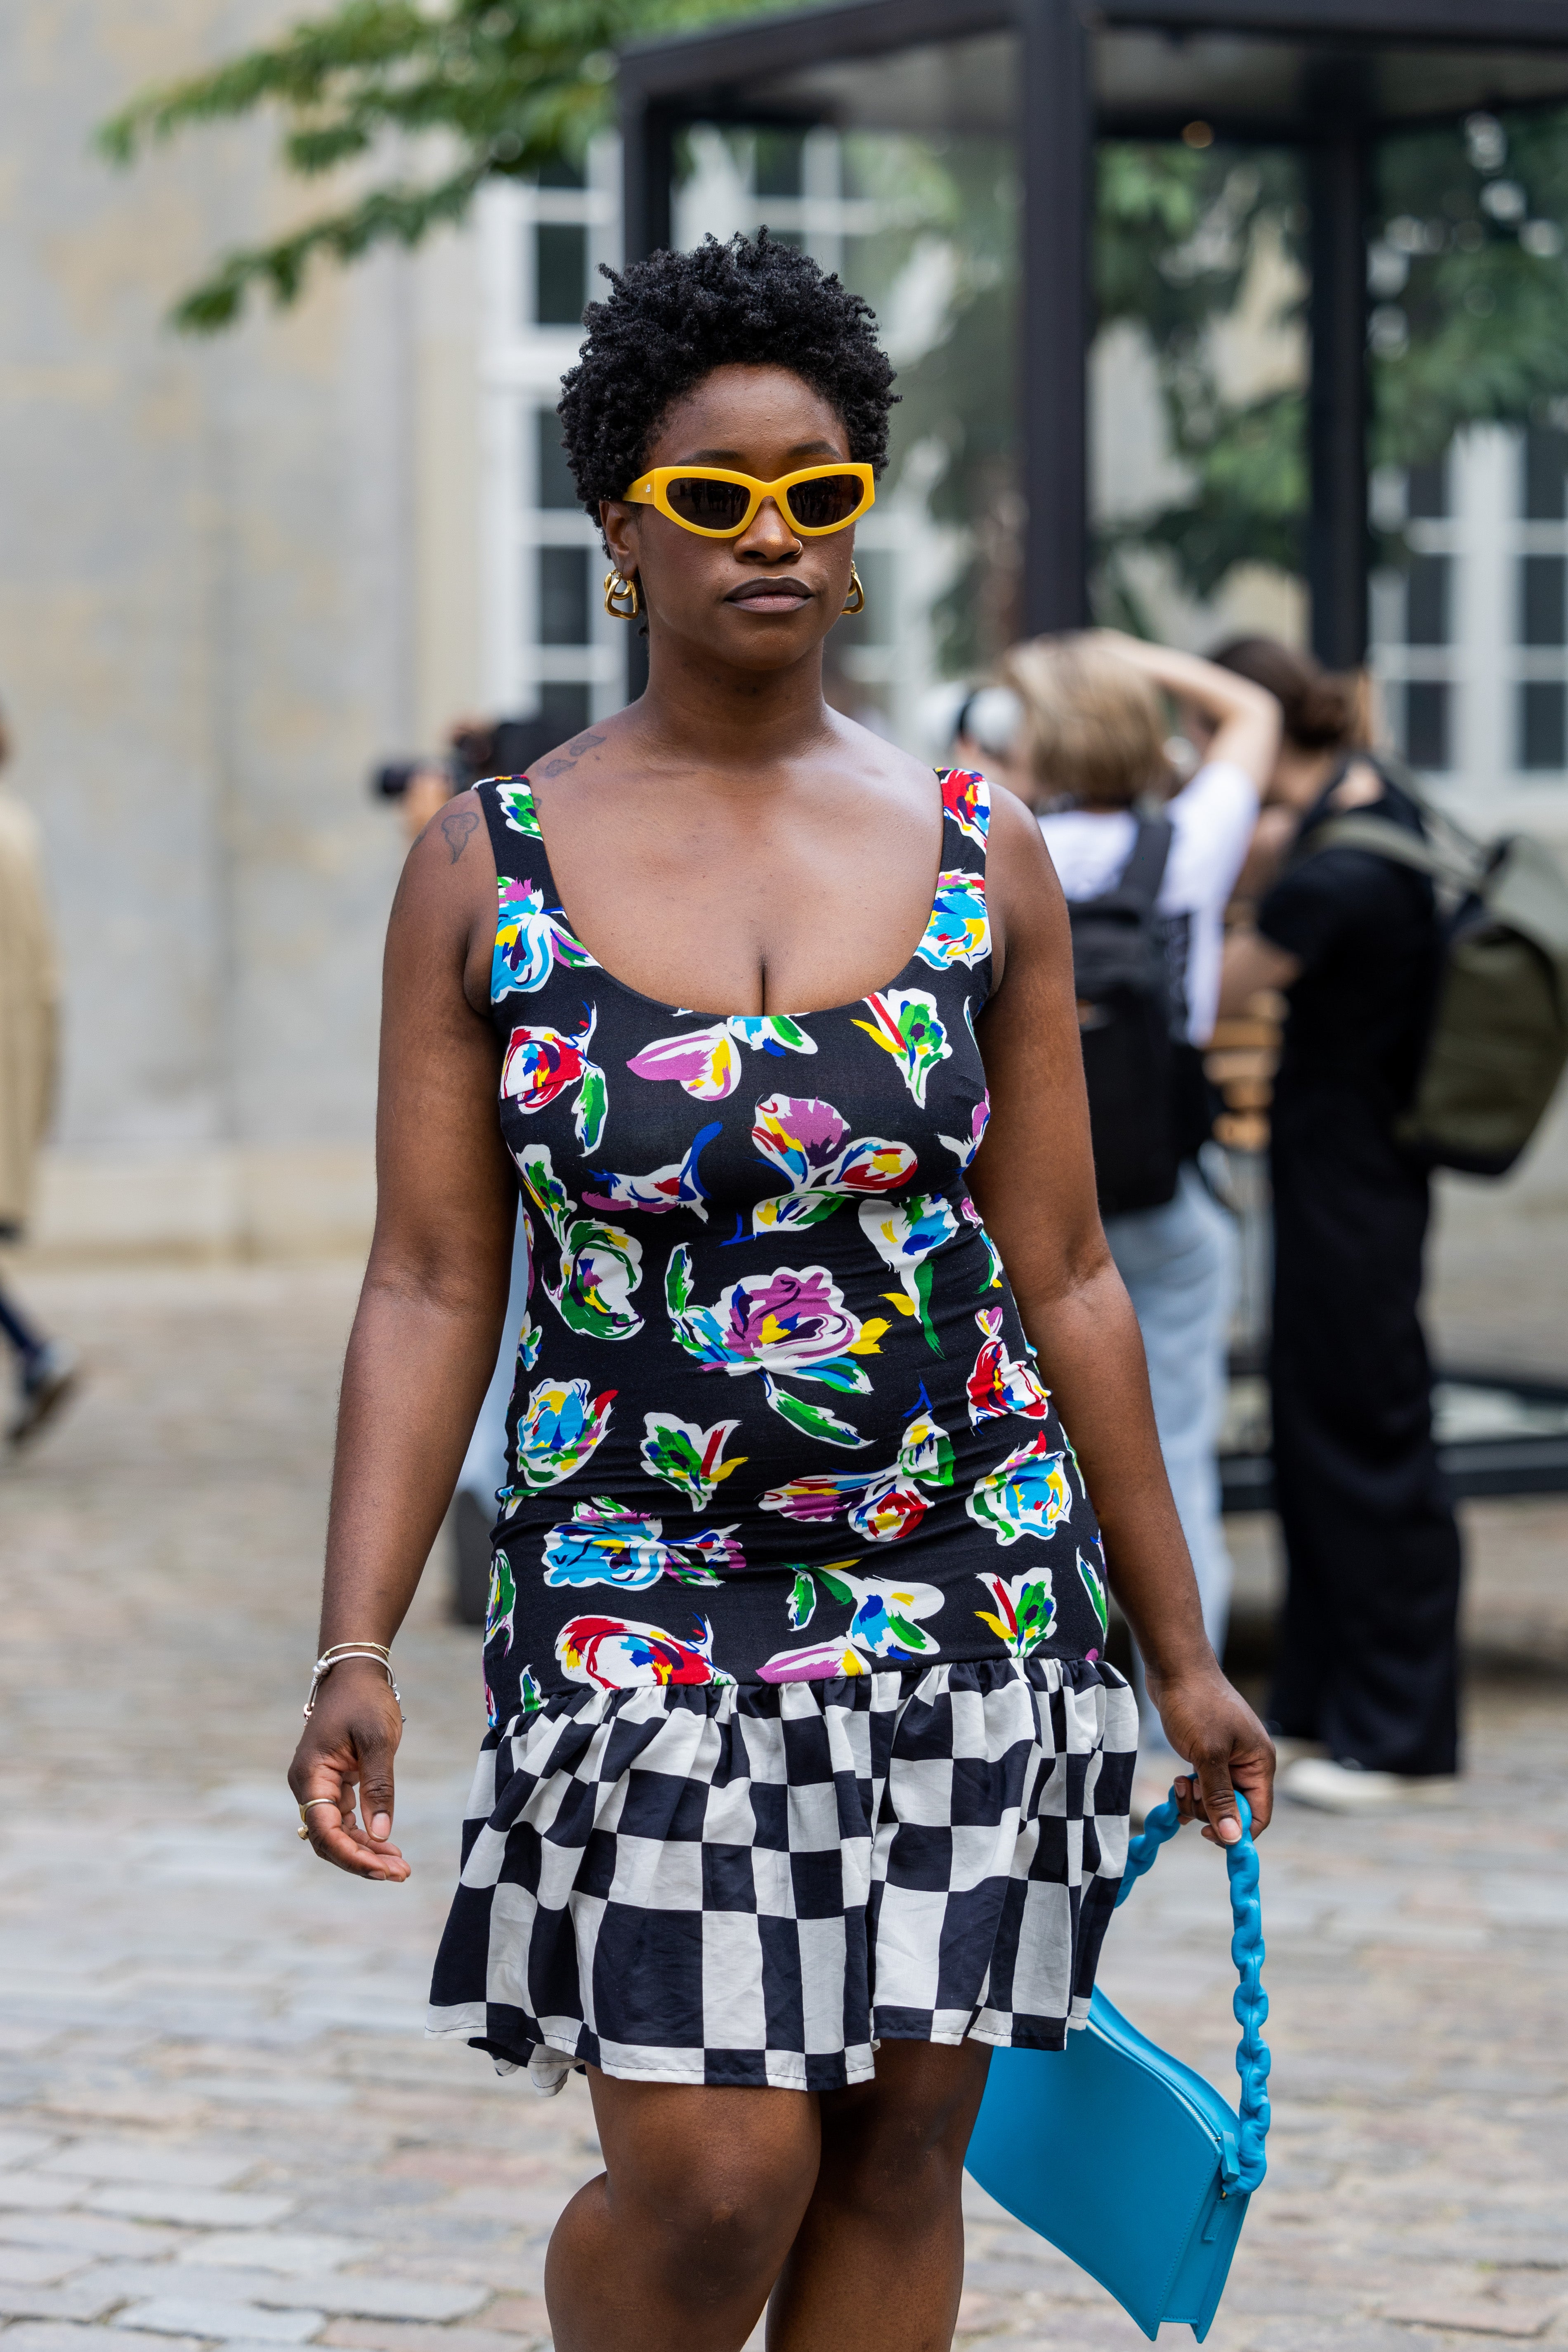 Best Of Street Style At The Paris Fashion Week | Grazia India